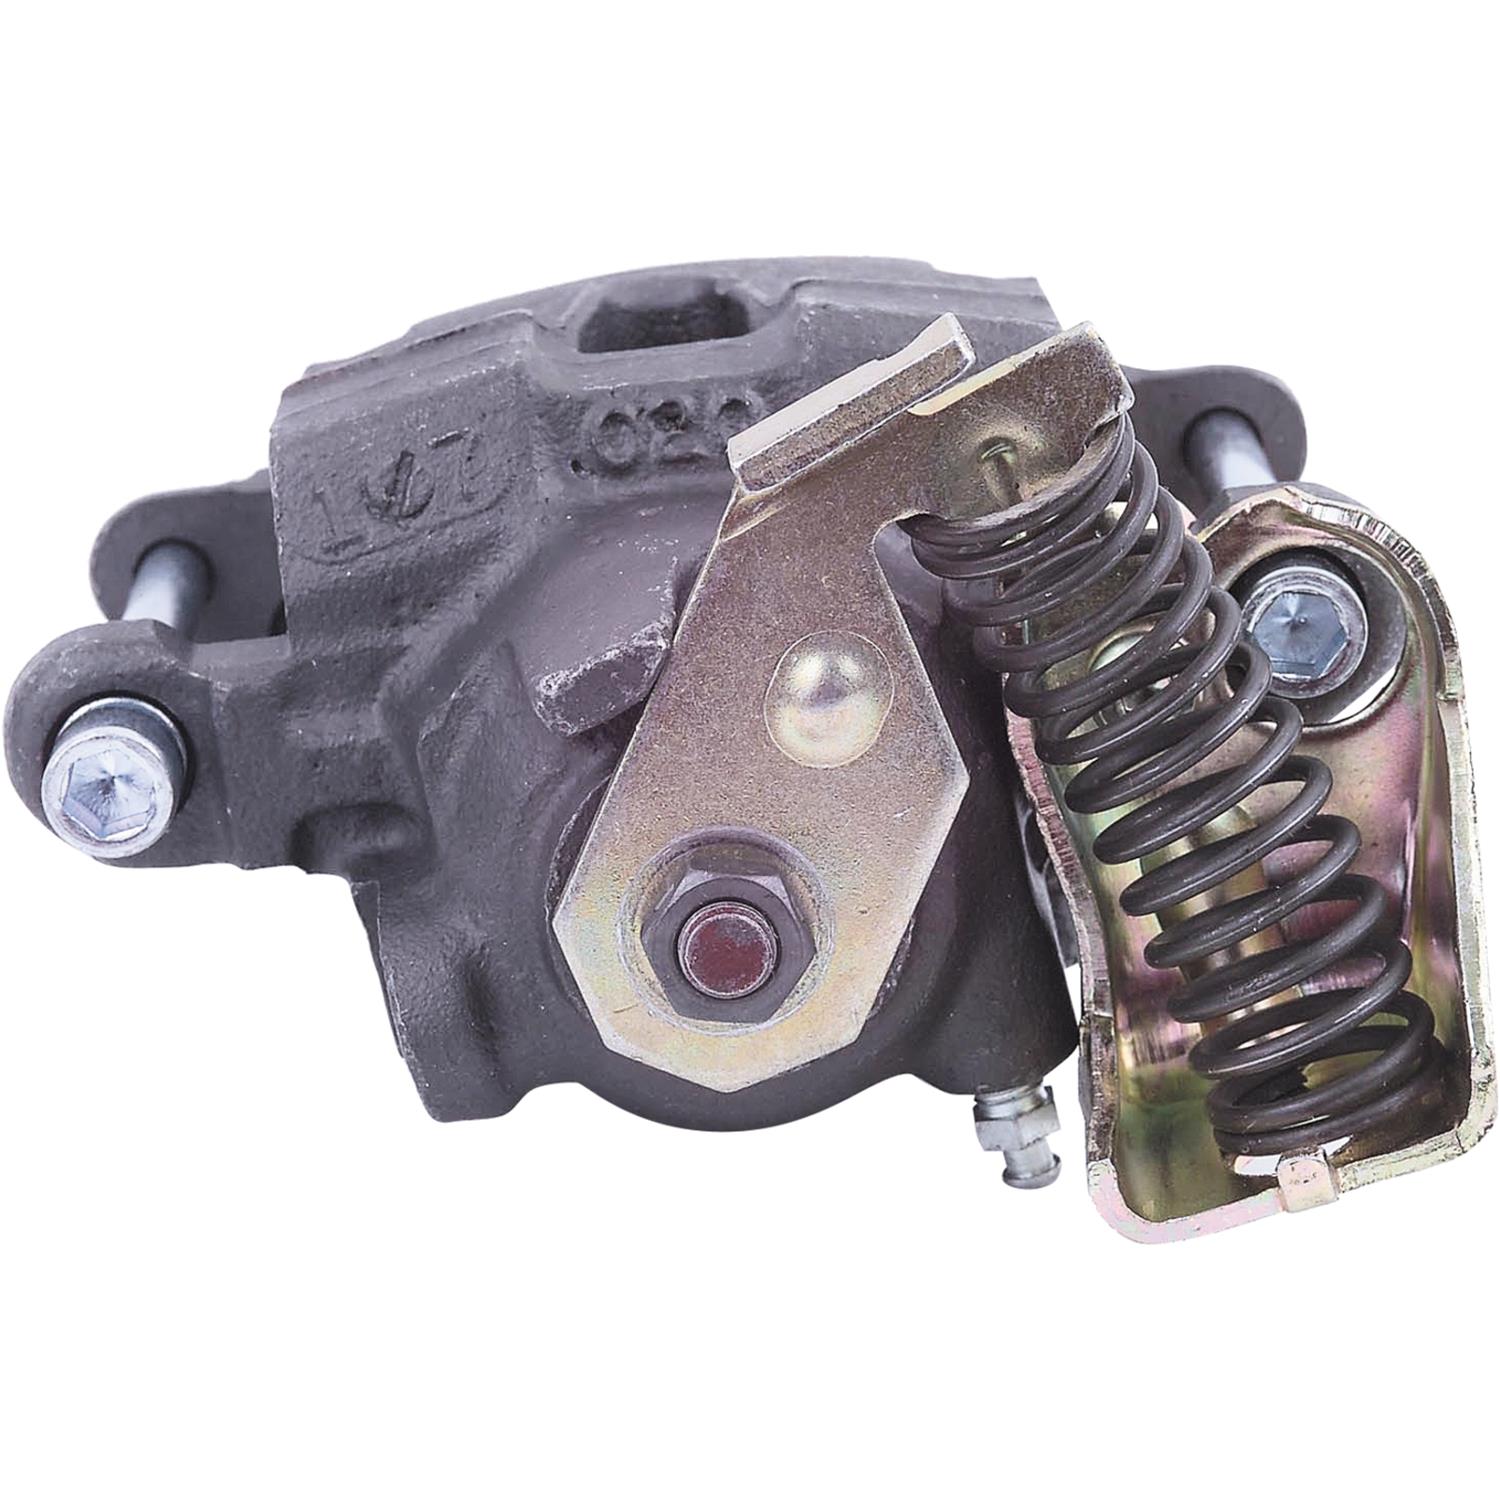 Unloaded Brake Caliper Cardone 19-2685 Remanufactured Import Friction Ready 